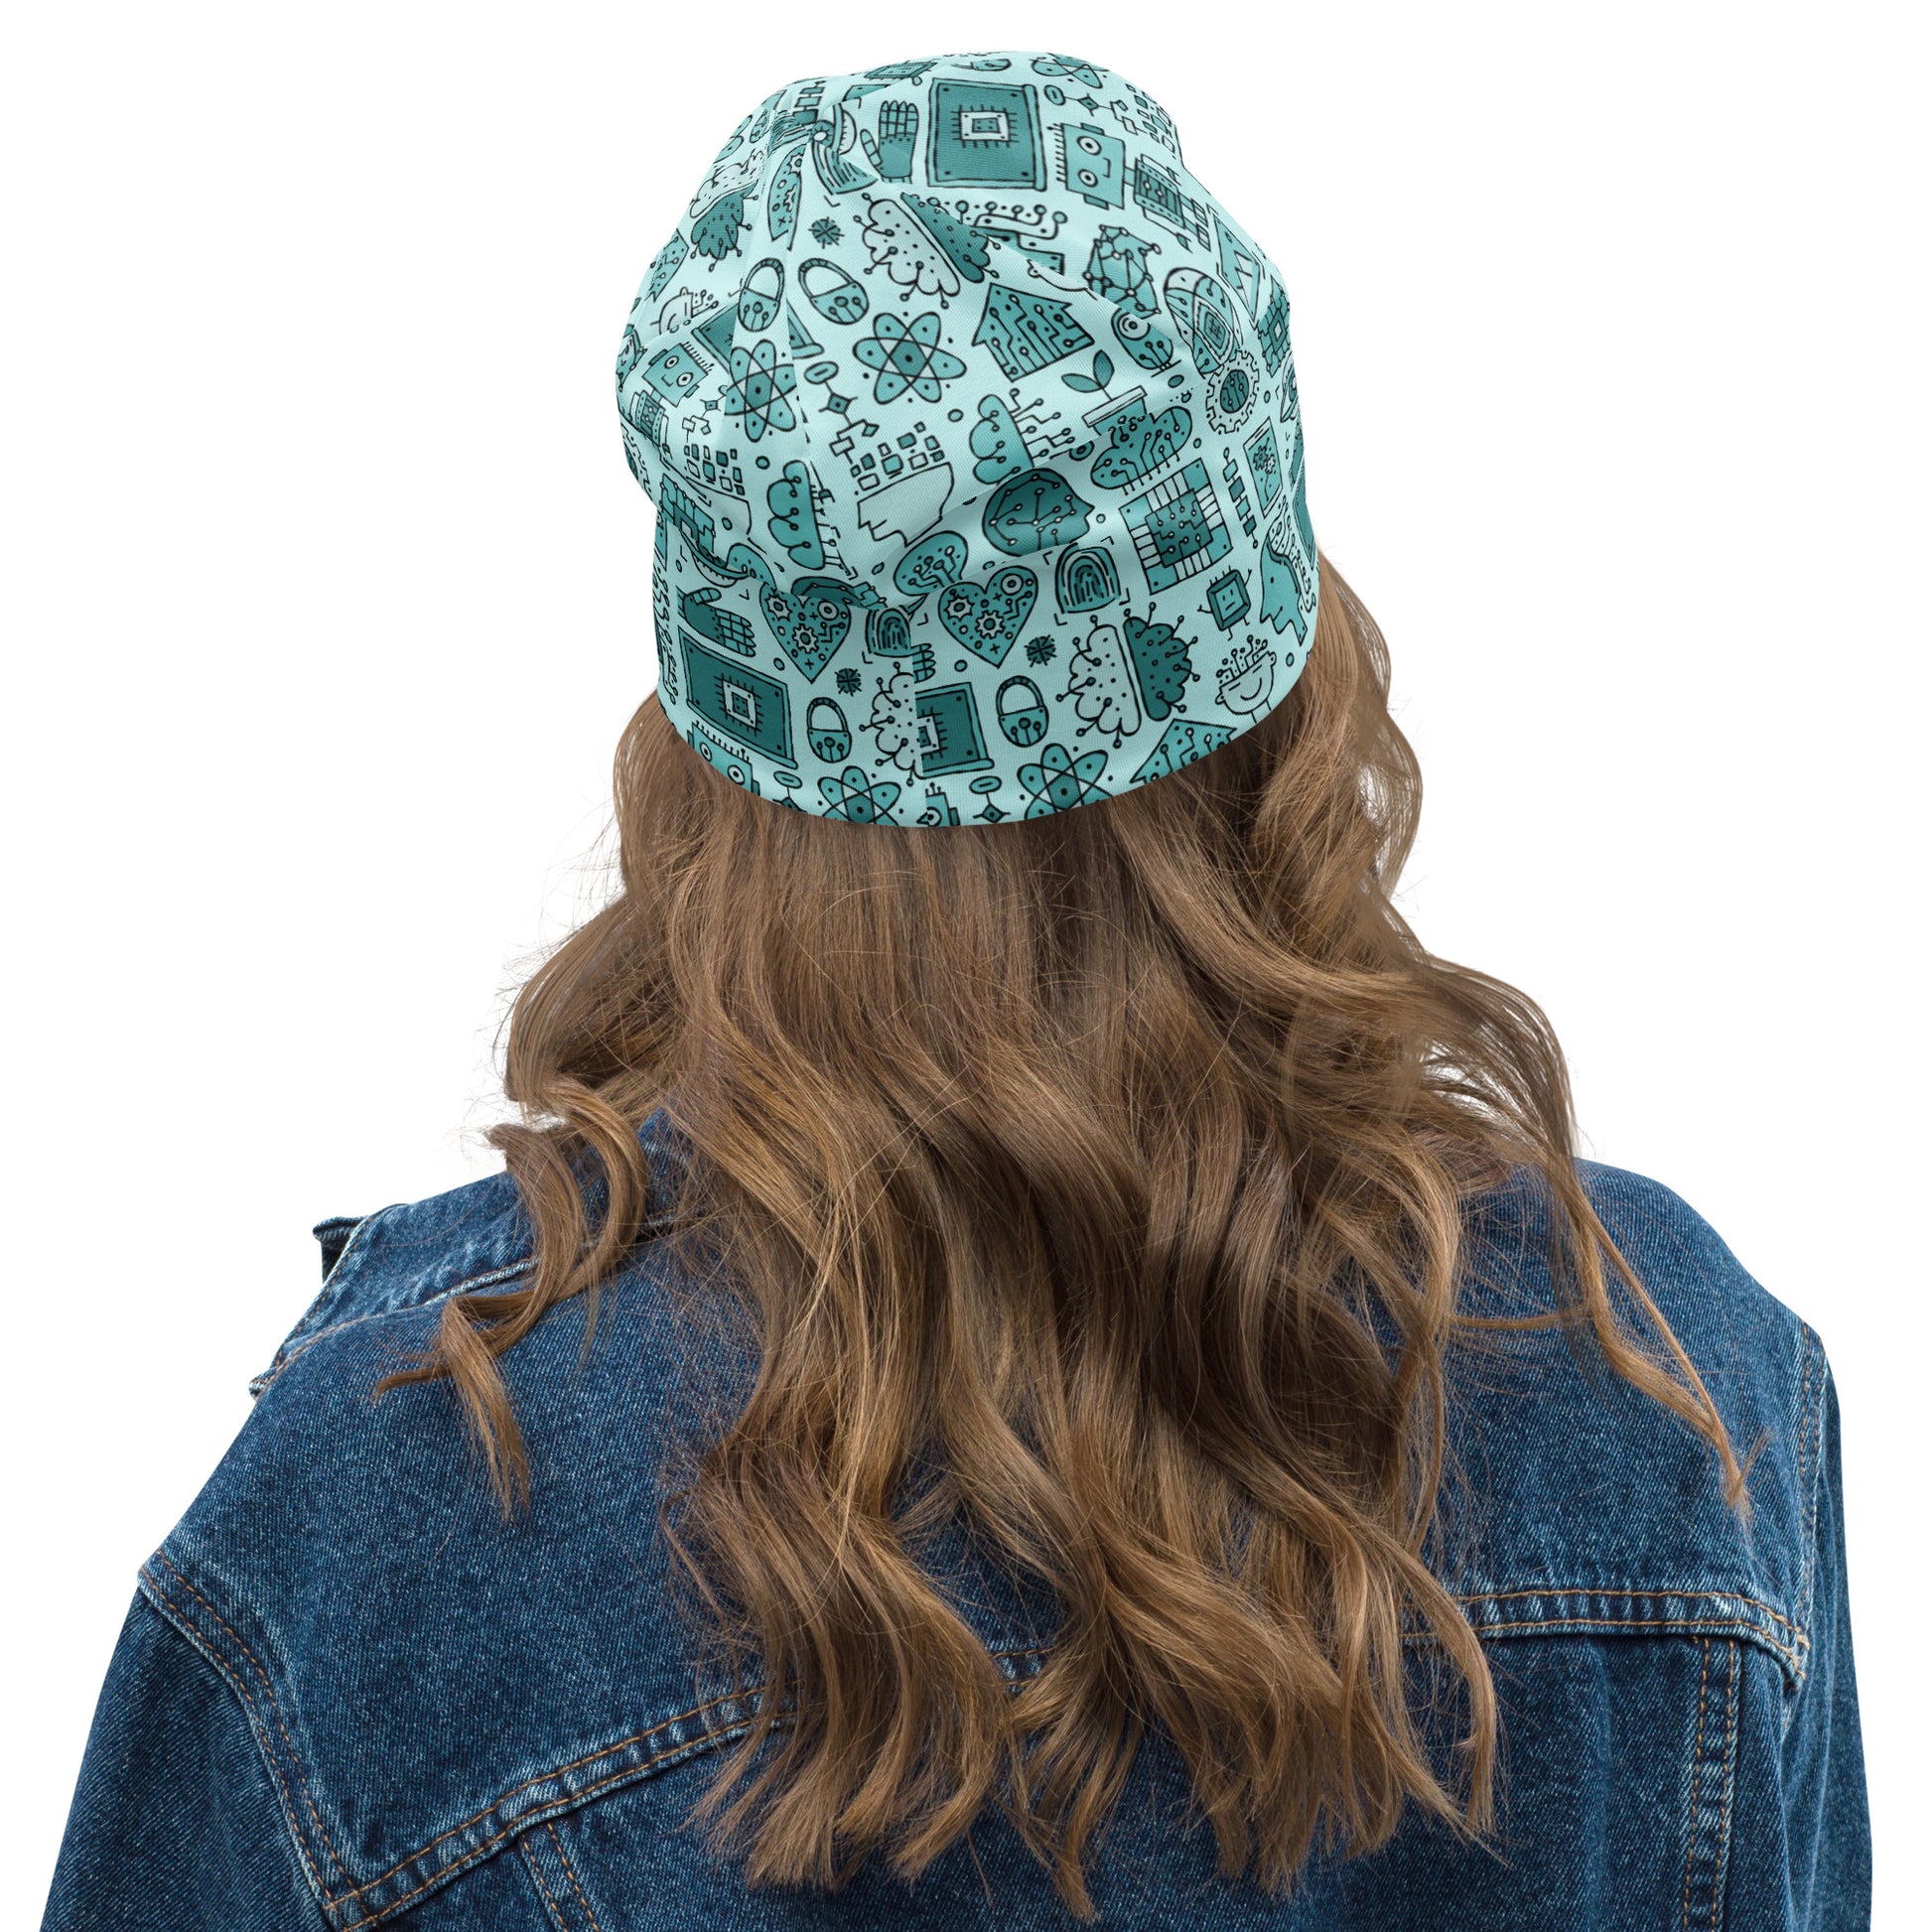 All-Over Print Beanie Artificial Intelligence kudrylab